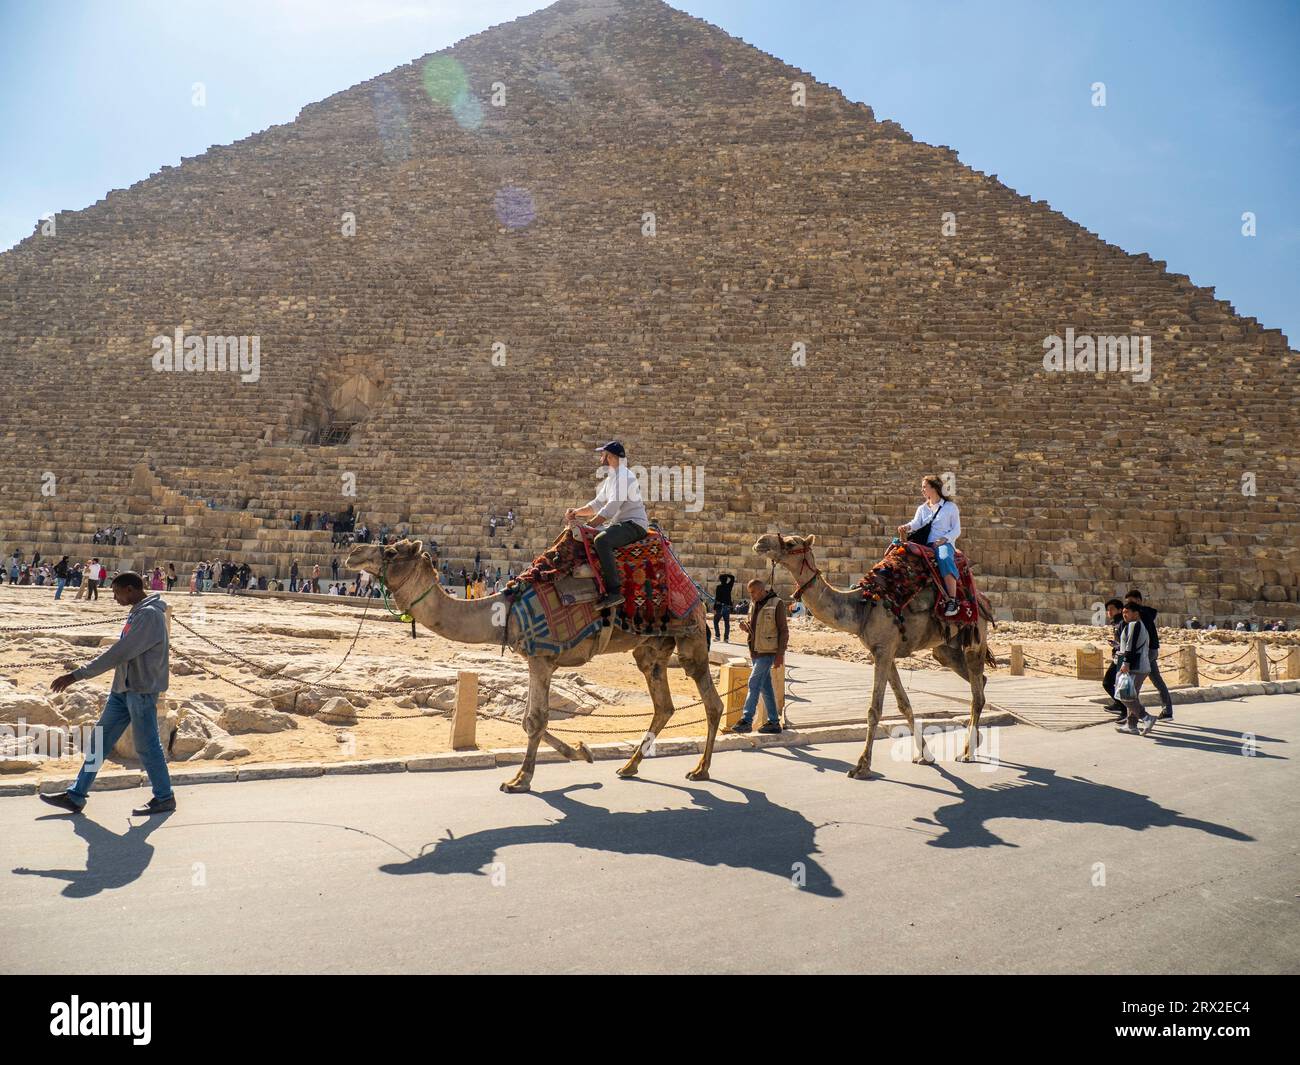 Tourist on a camel ride in front of the Great Pyramid of Giza, the oldest of the Seven Wonders of the World, near Cairo, Egypt Stock Photo